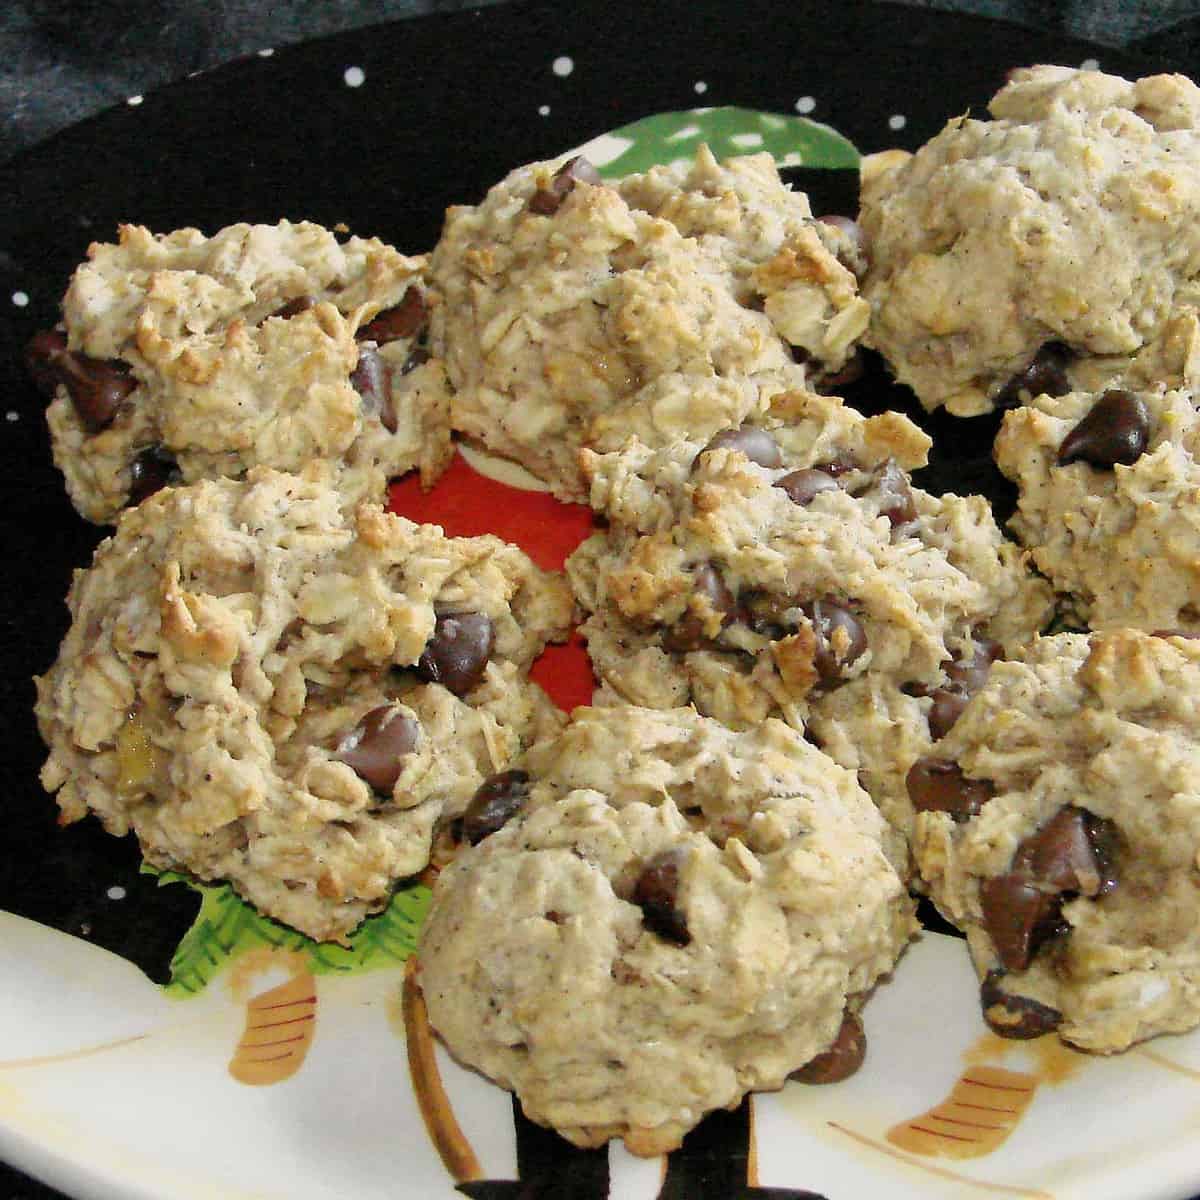  Who needs eggs and dairy when you can have these scrumptious vegan cookies?